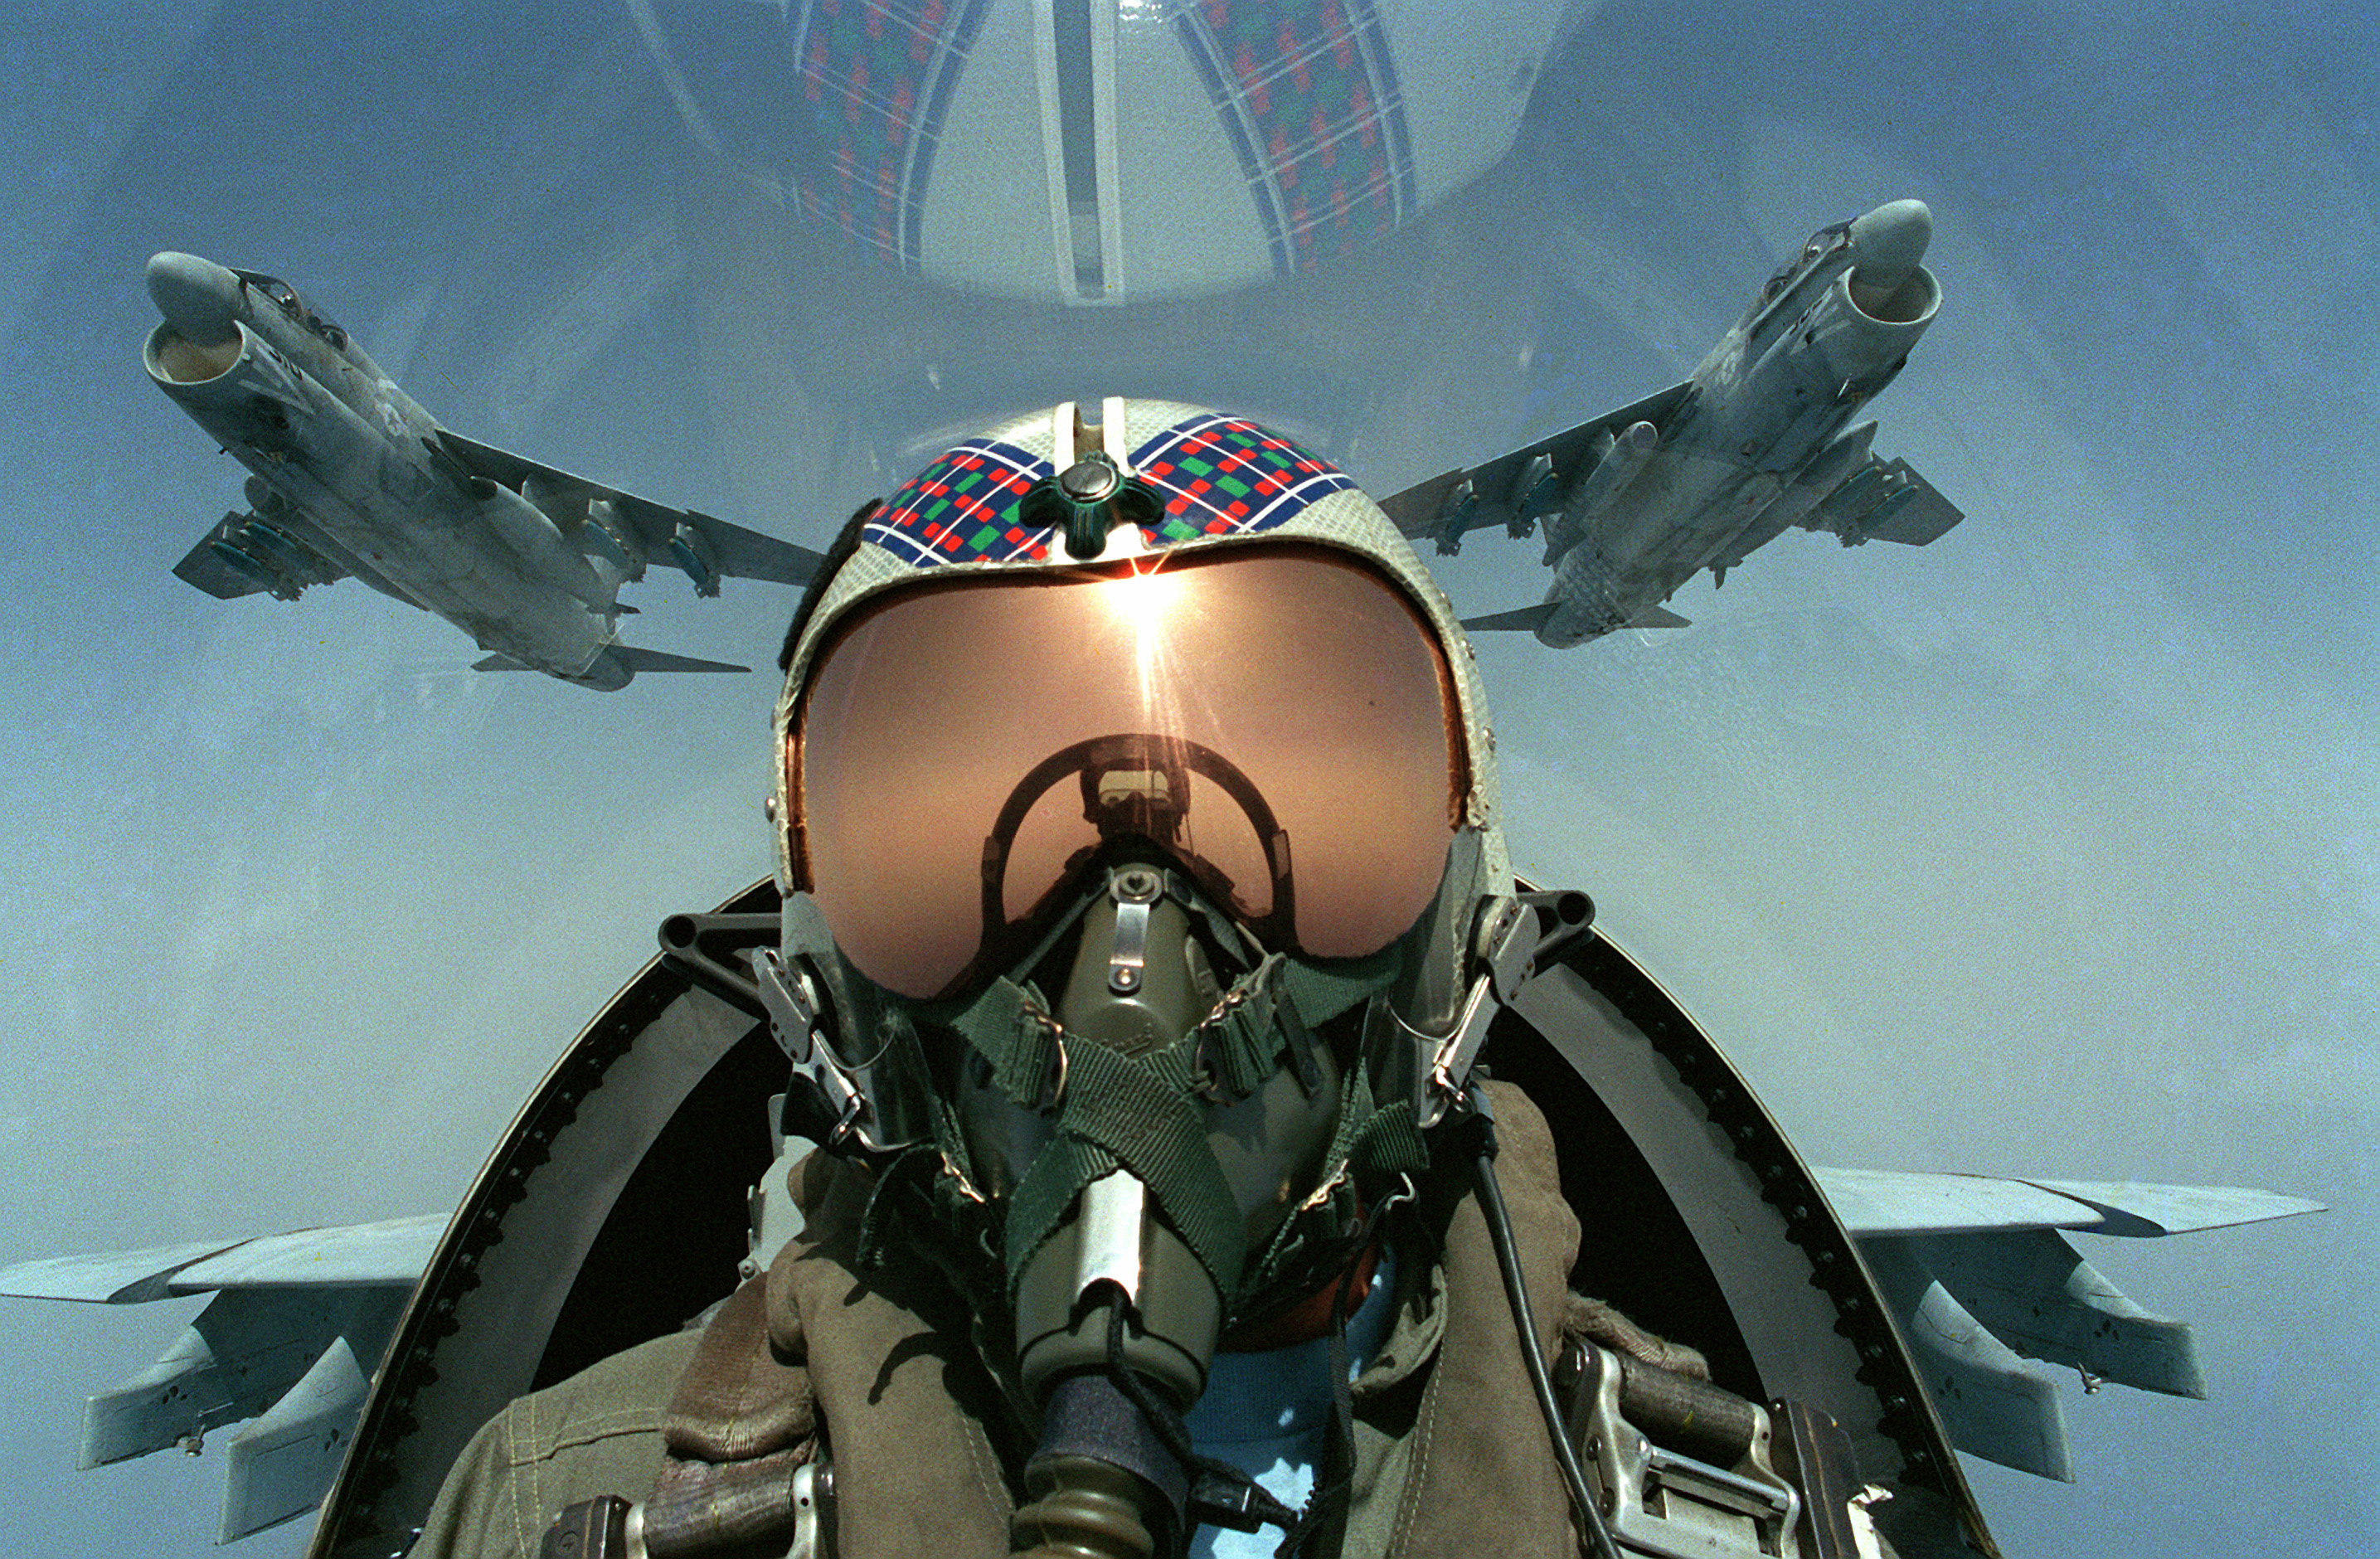 OPINION: NEED A FIGHTER JET? DON’T ASK A PILOT